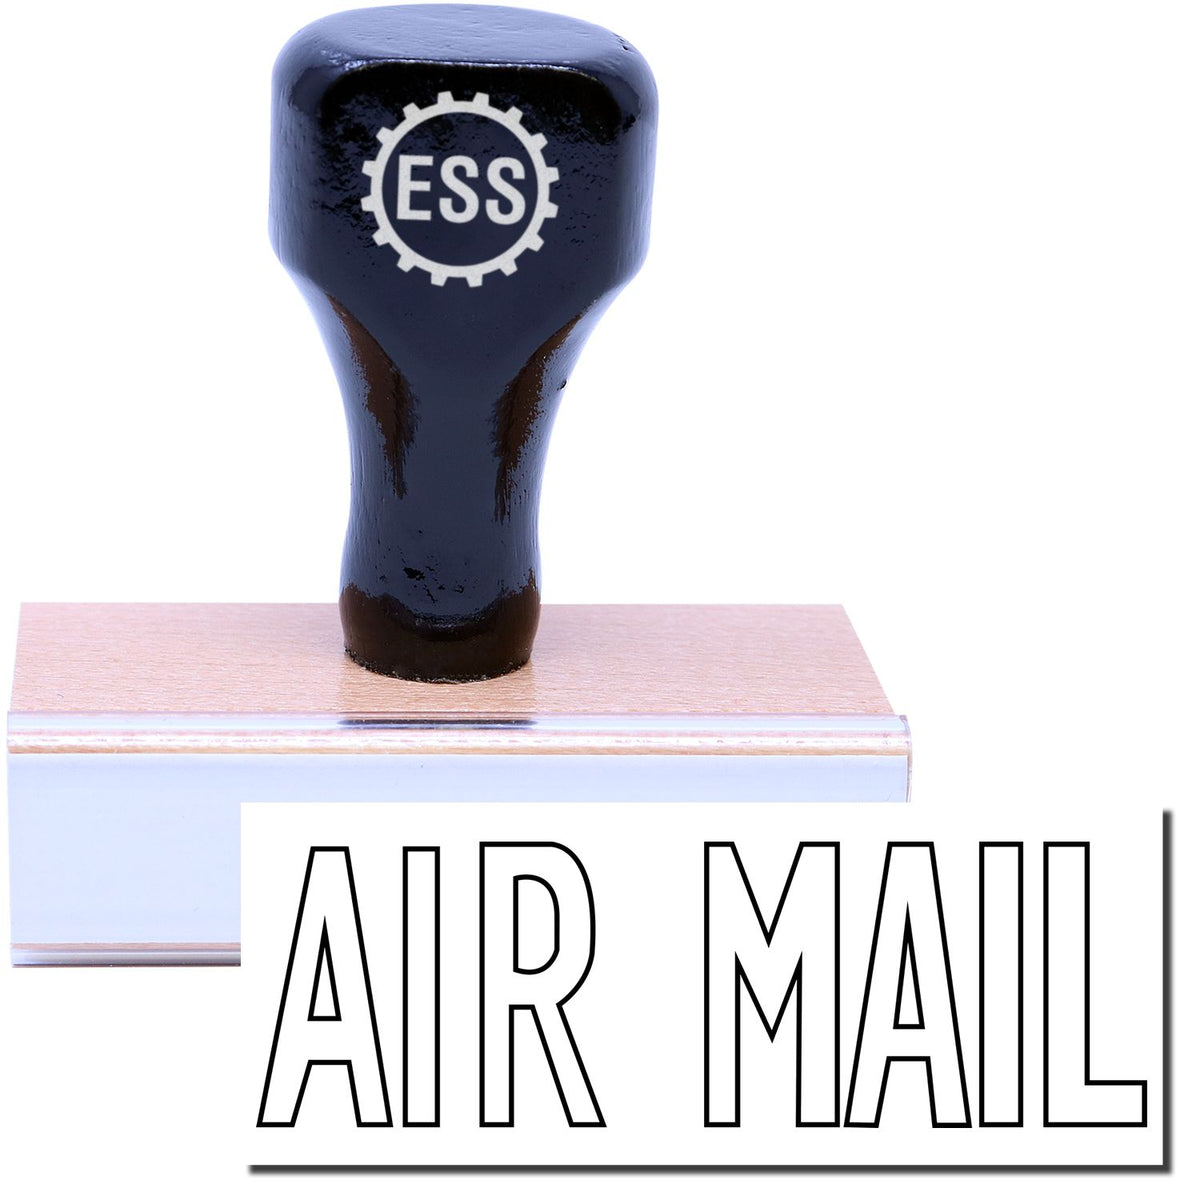 A stock office rubber stamp with a stamped image showing how the text &quot;AIR MAIL&quot; in a large outline font is displayed after stamping.